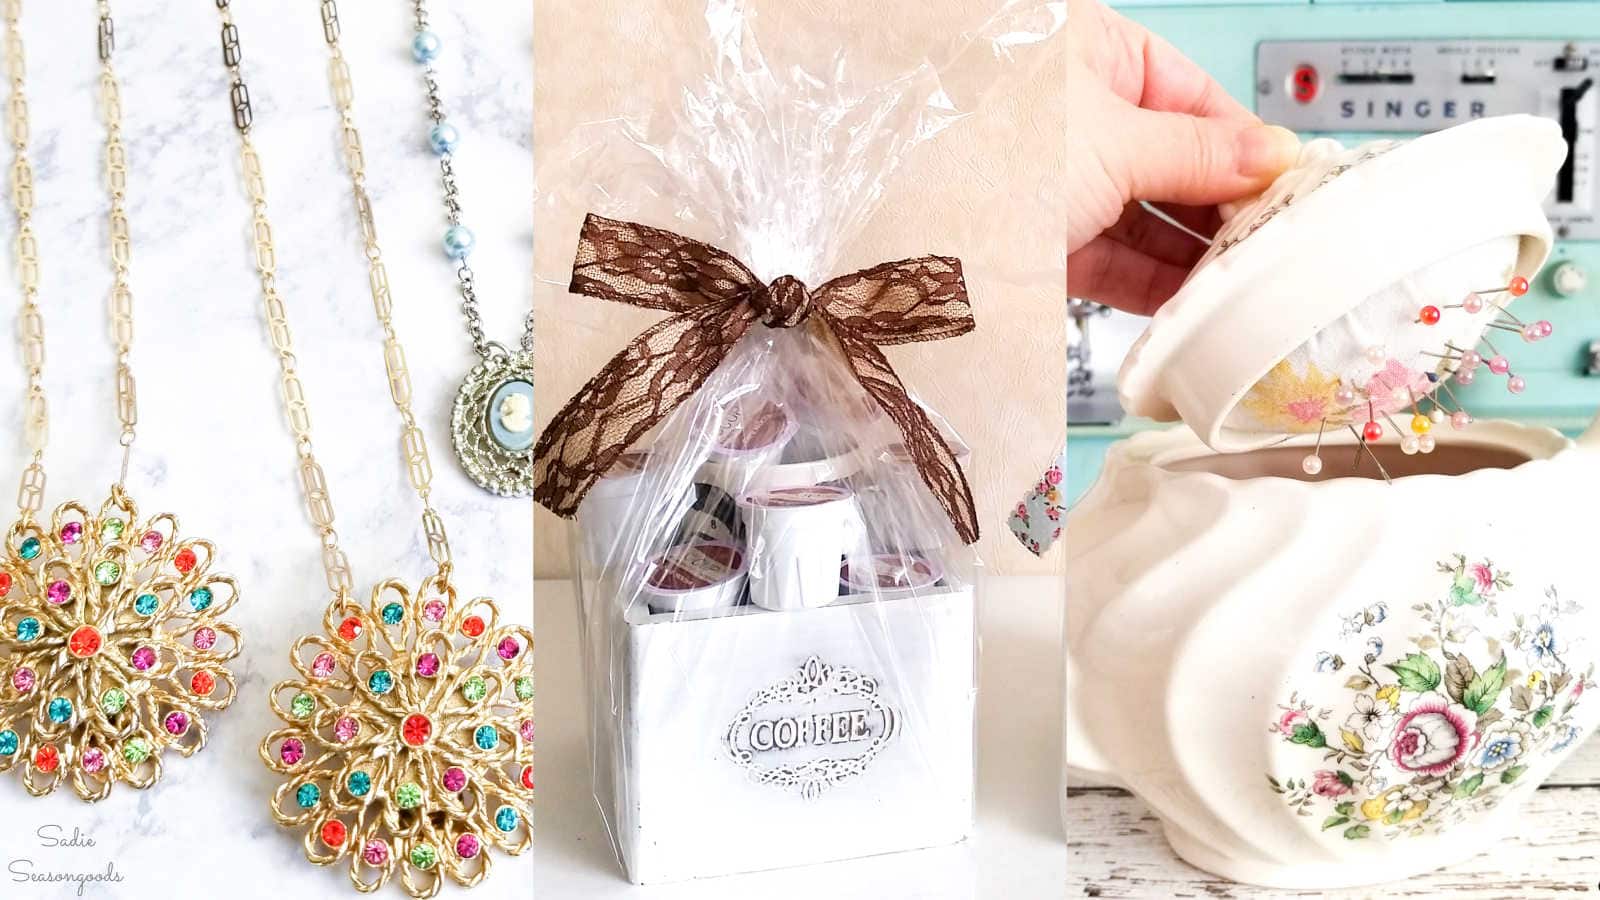 DIY Christmas Gifts: 100+ Homemade Gifts Your Friends and Family Will Adore